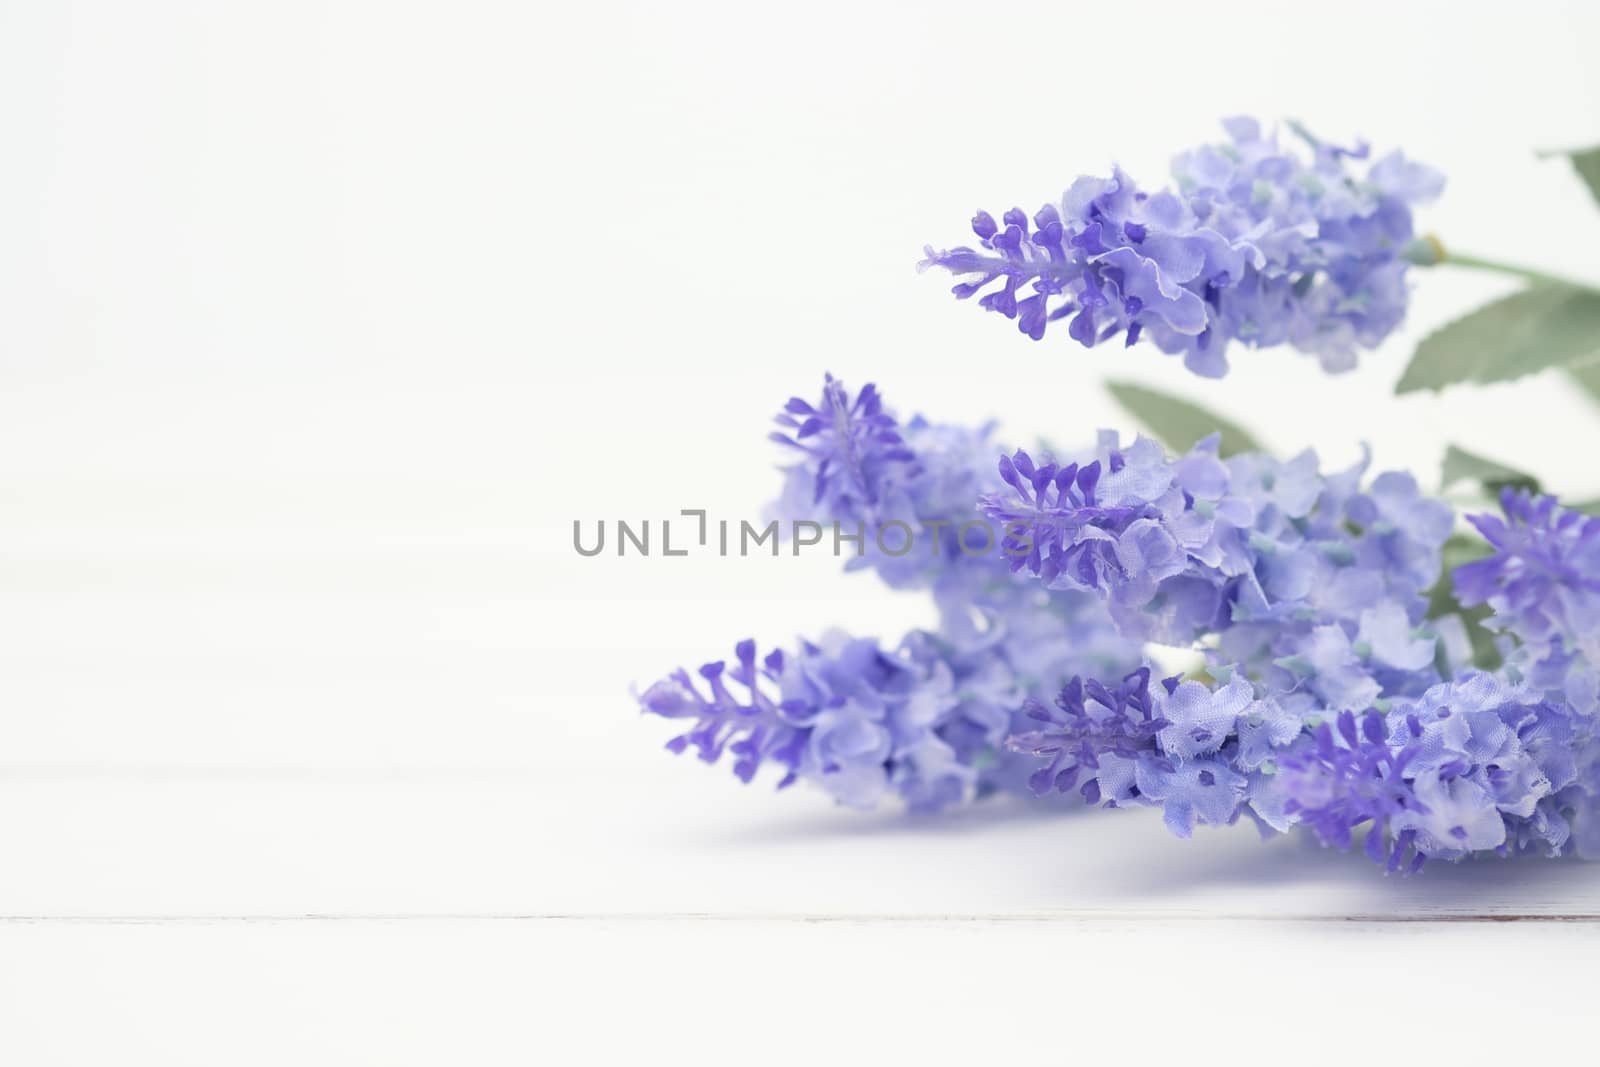 Lavender flowers on white wood table background